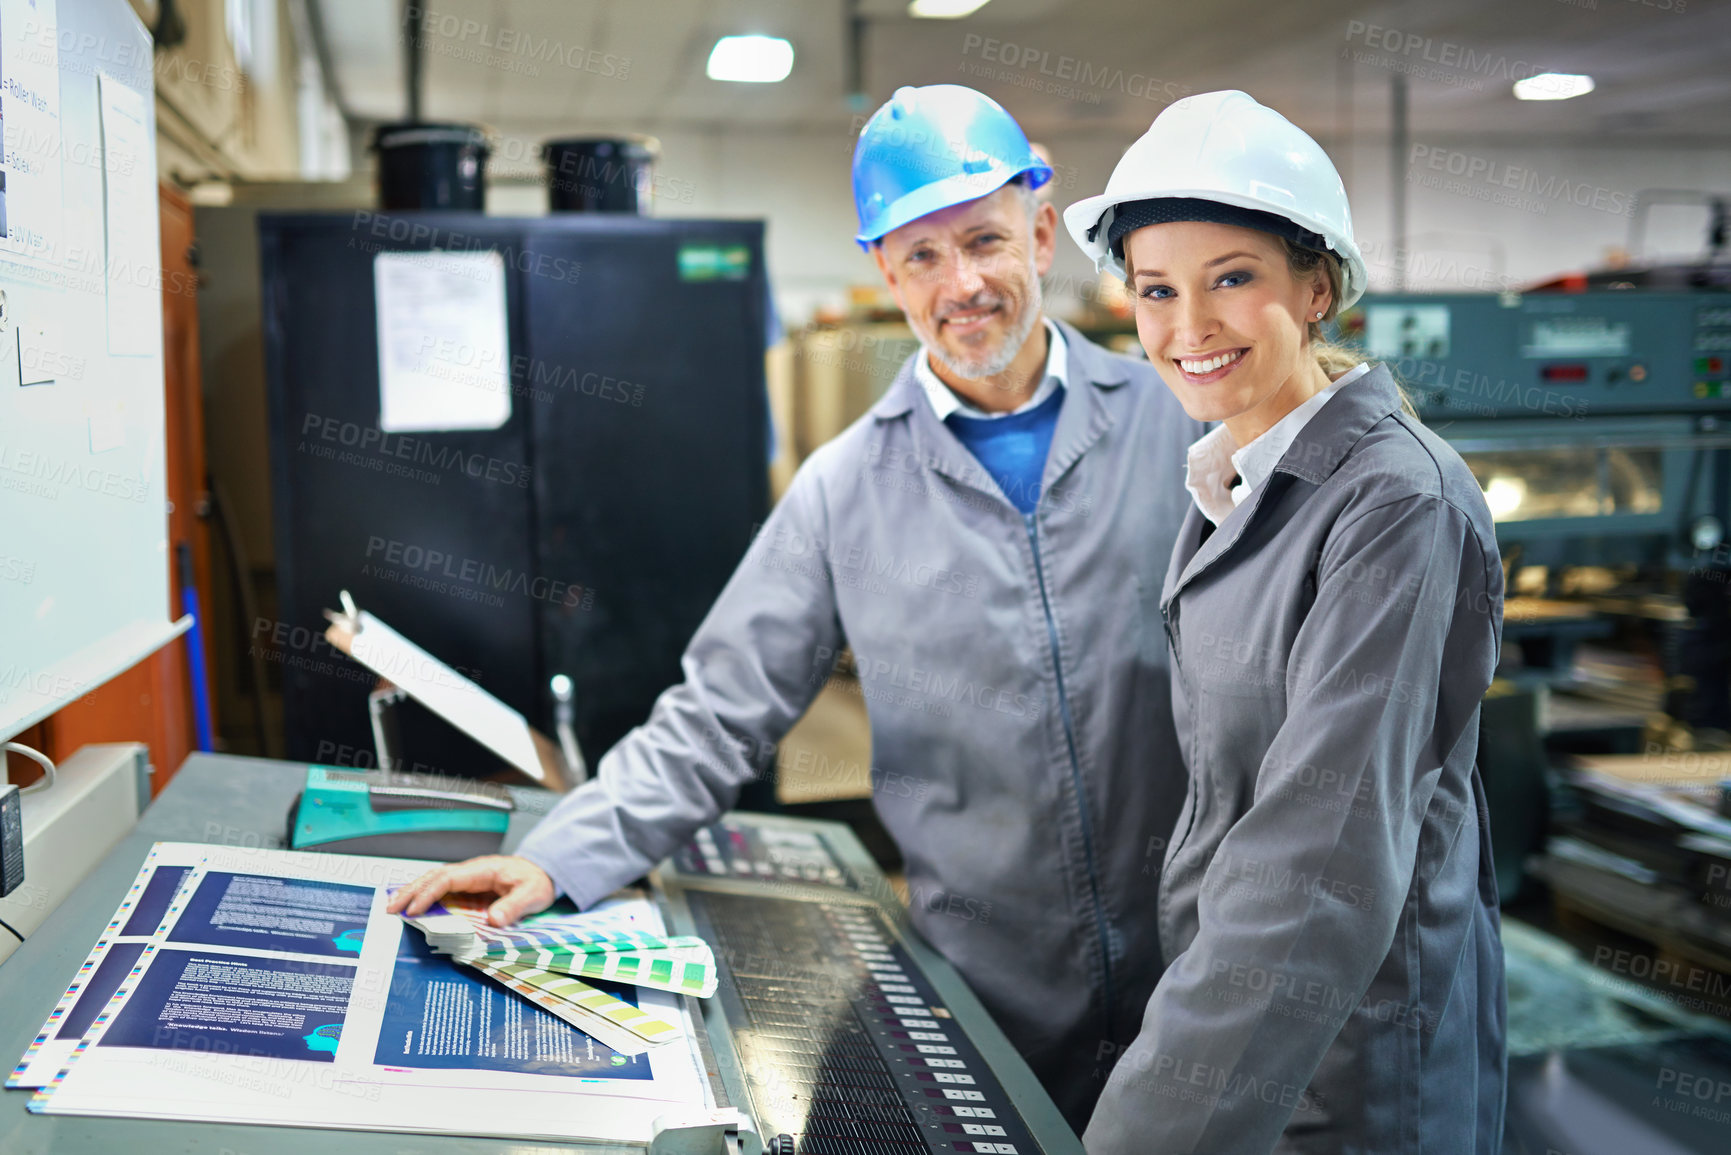 Buy stock photo Portrait of a people working inside a printing, packaging and distribution factory. The commercial designs displayed represent a simulation of a real product and have been changed or altered enough by our team of retouching and design specialists so that they don't have any copyright infringements